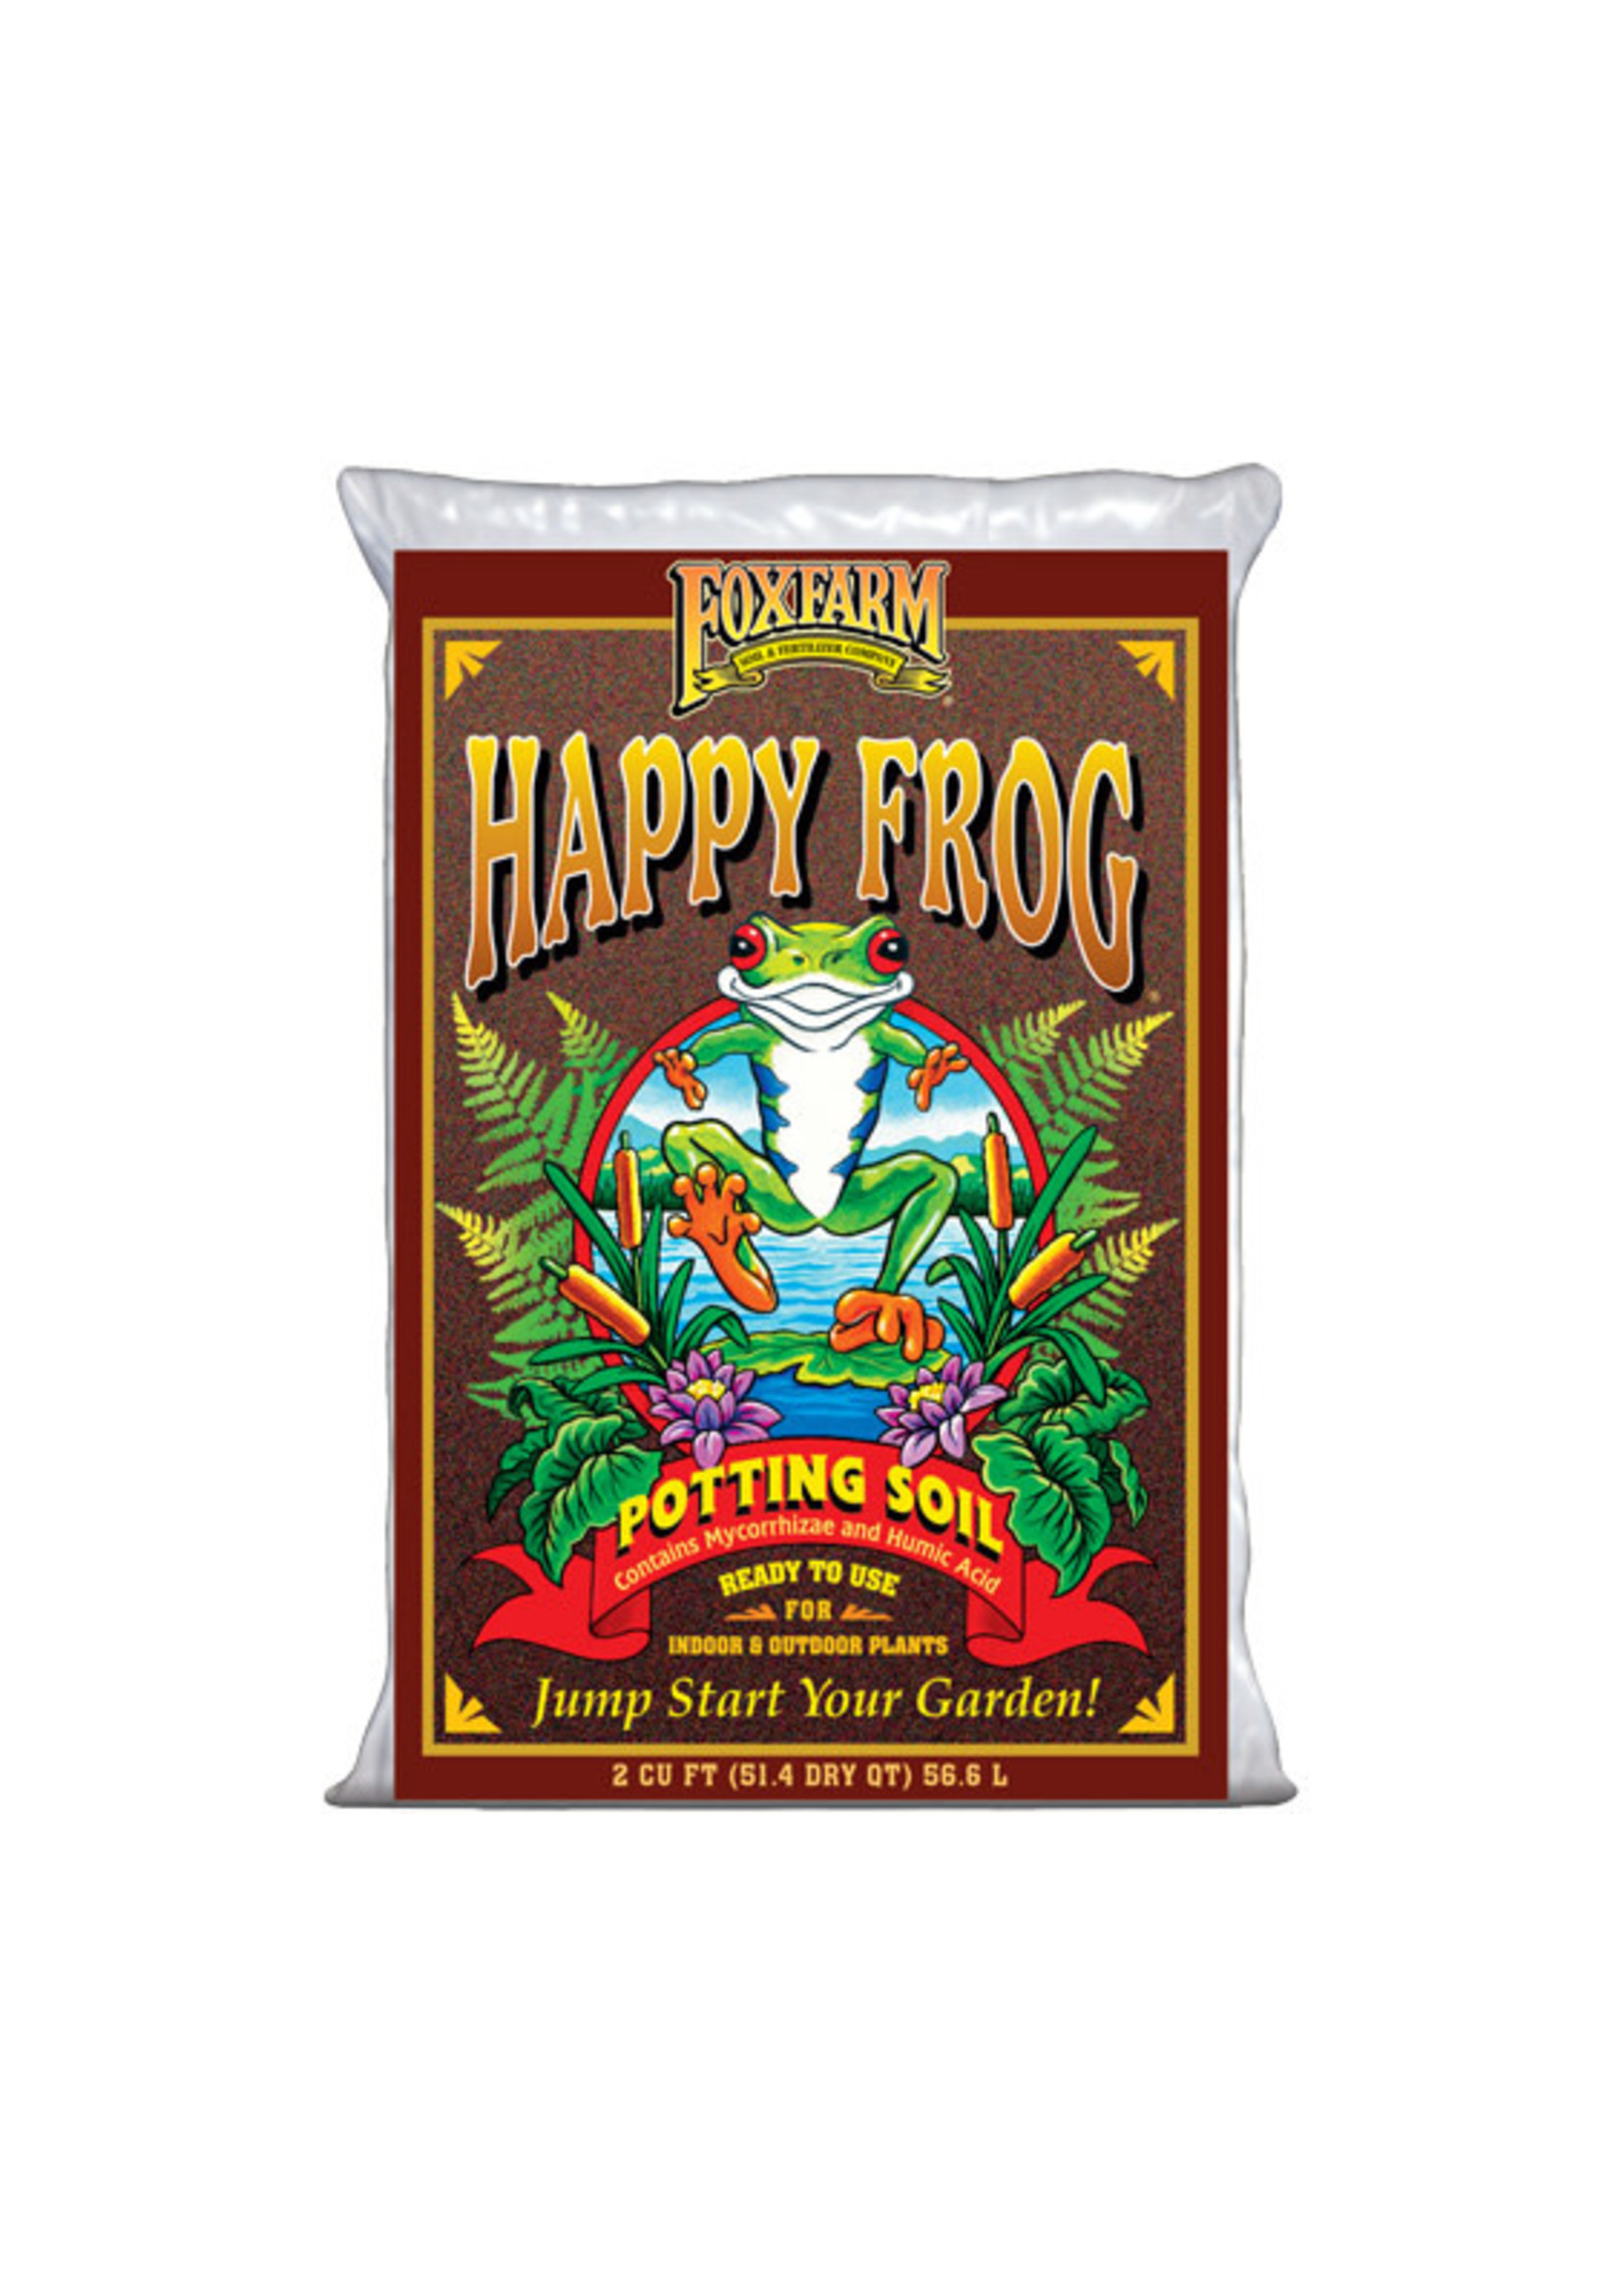 Fox Farms Happy Frog Potting Soil 2.0 cu ft 56.6 L (Instore Only)